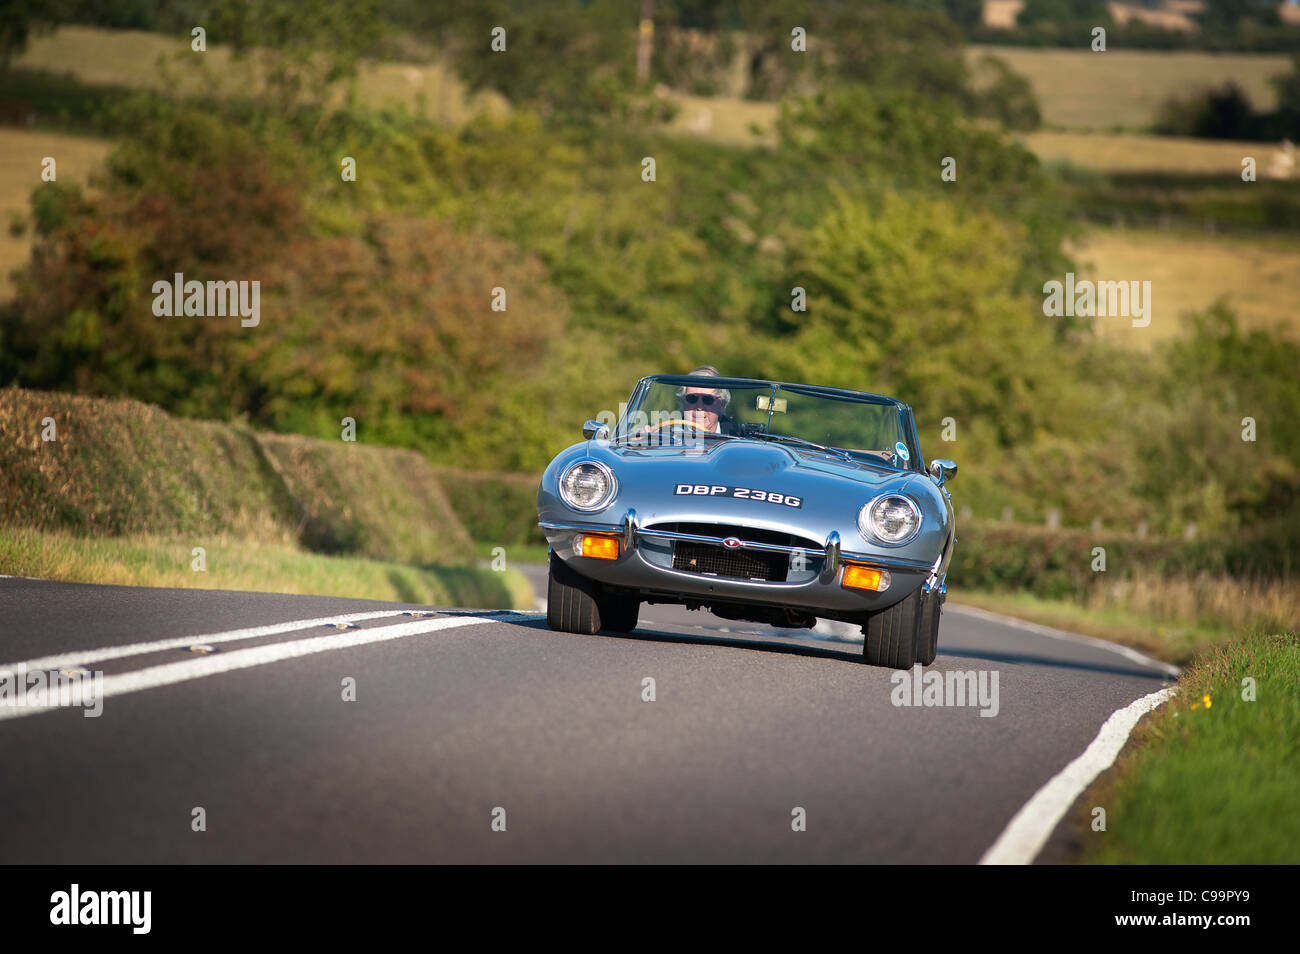 Jaguar E-Type sports car being driven through rural England in the summertime. Stock Photo